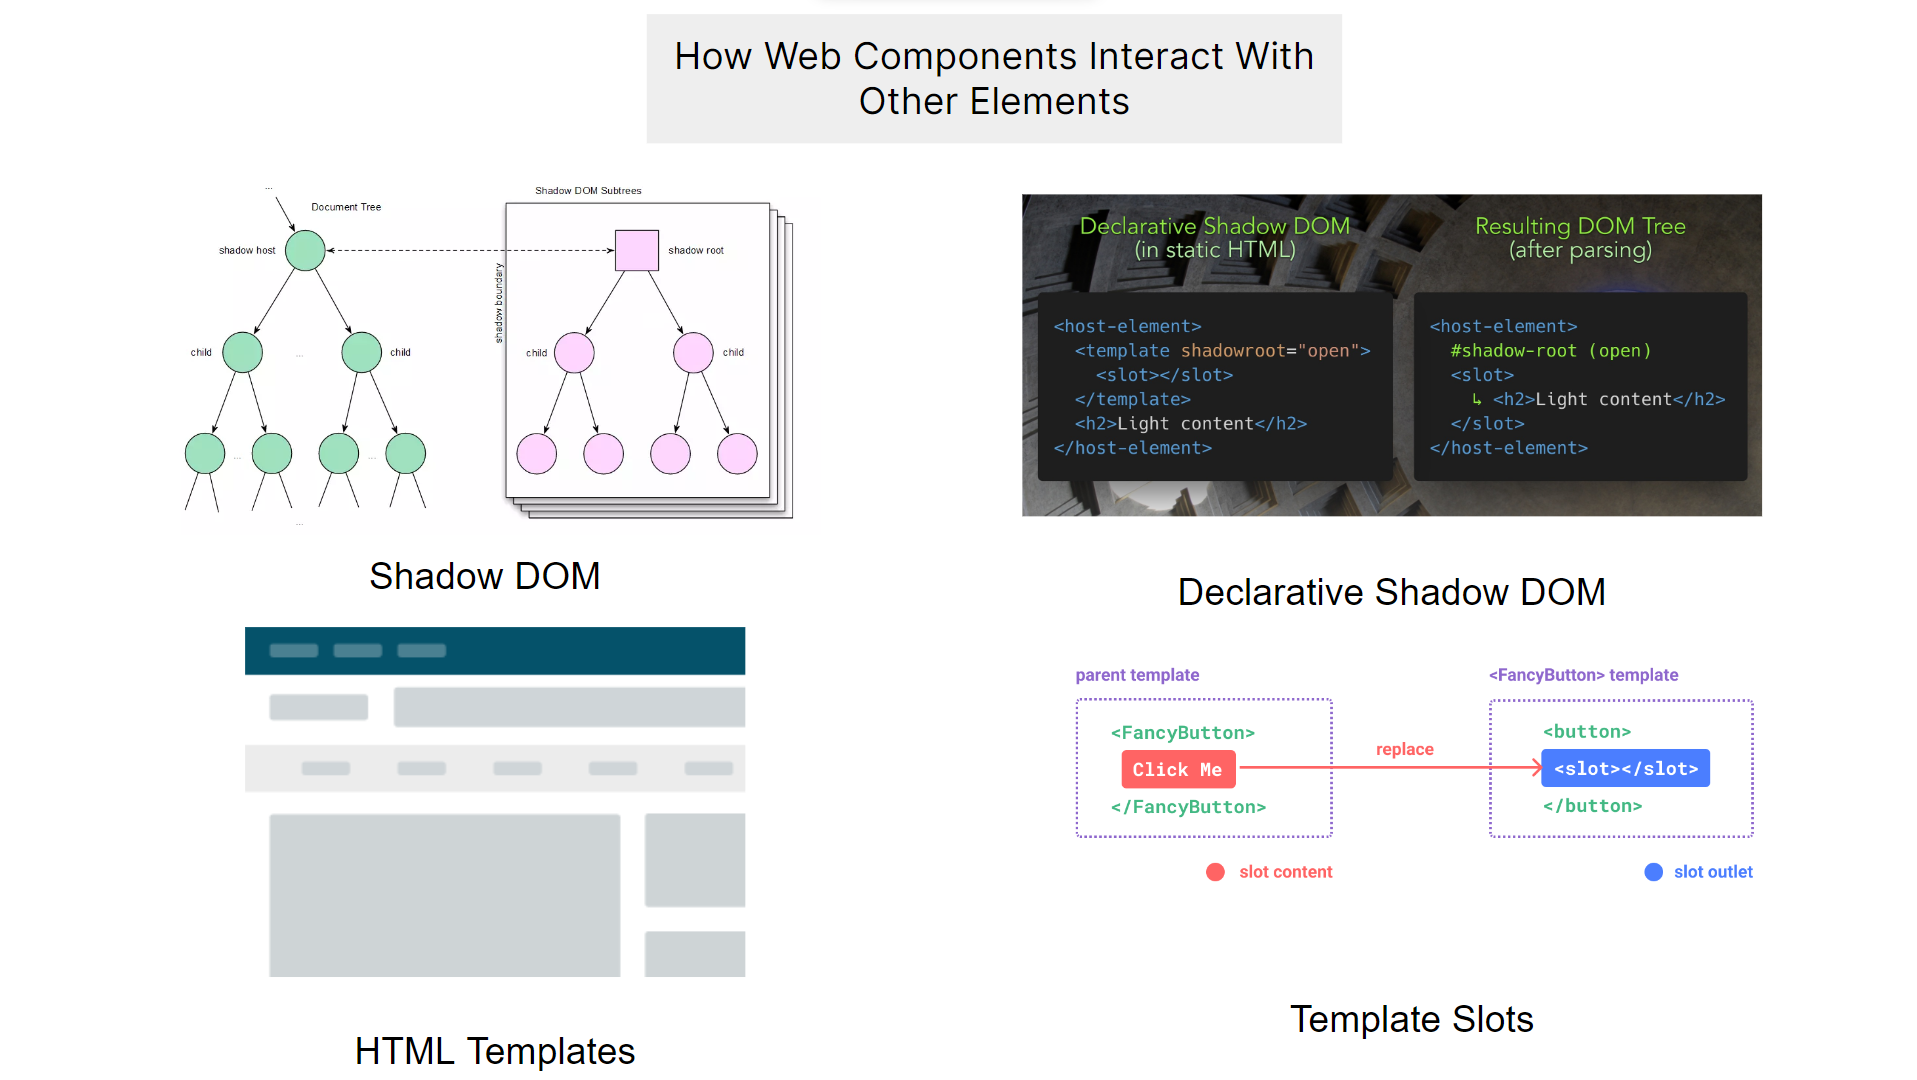 How Web Components Interact With Other Elements